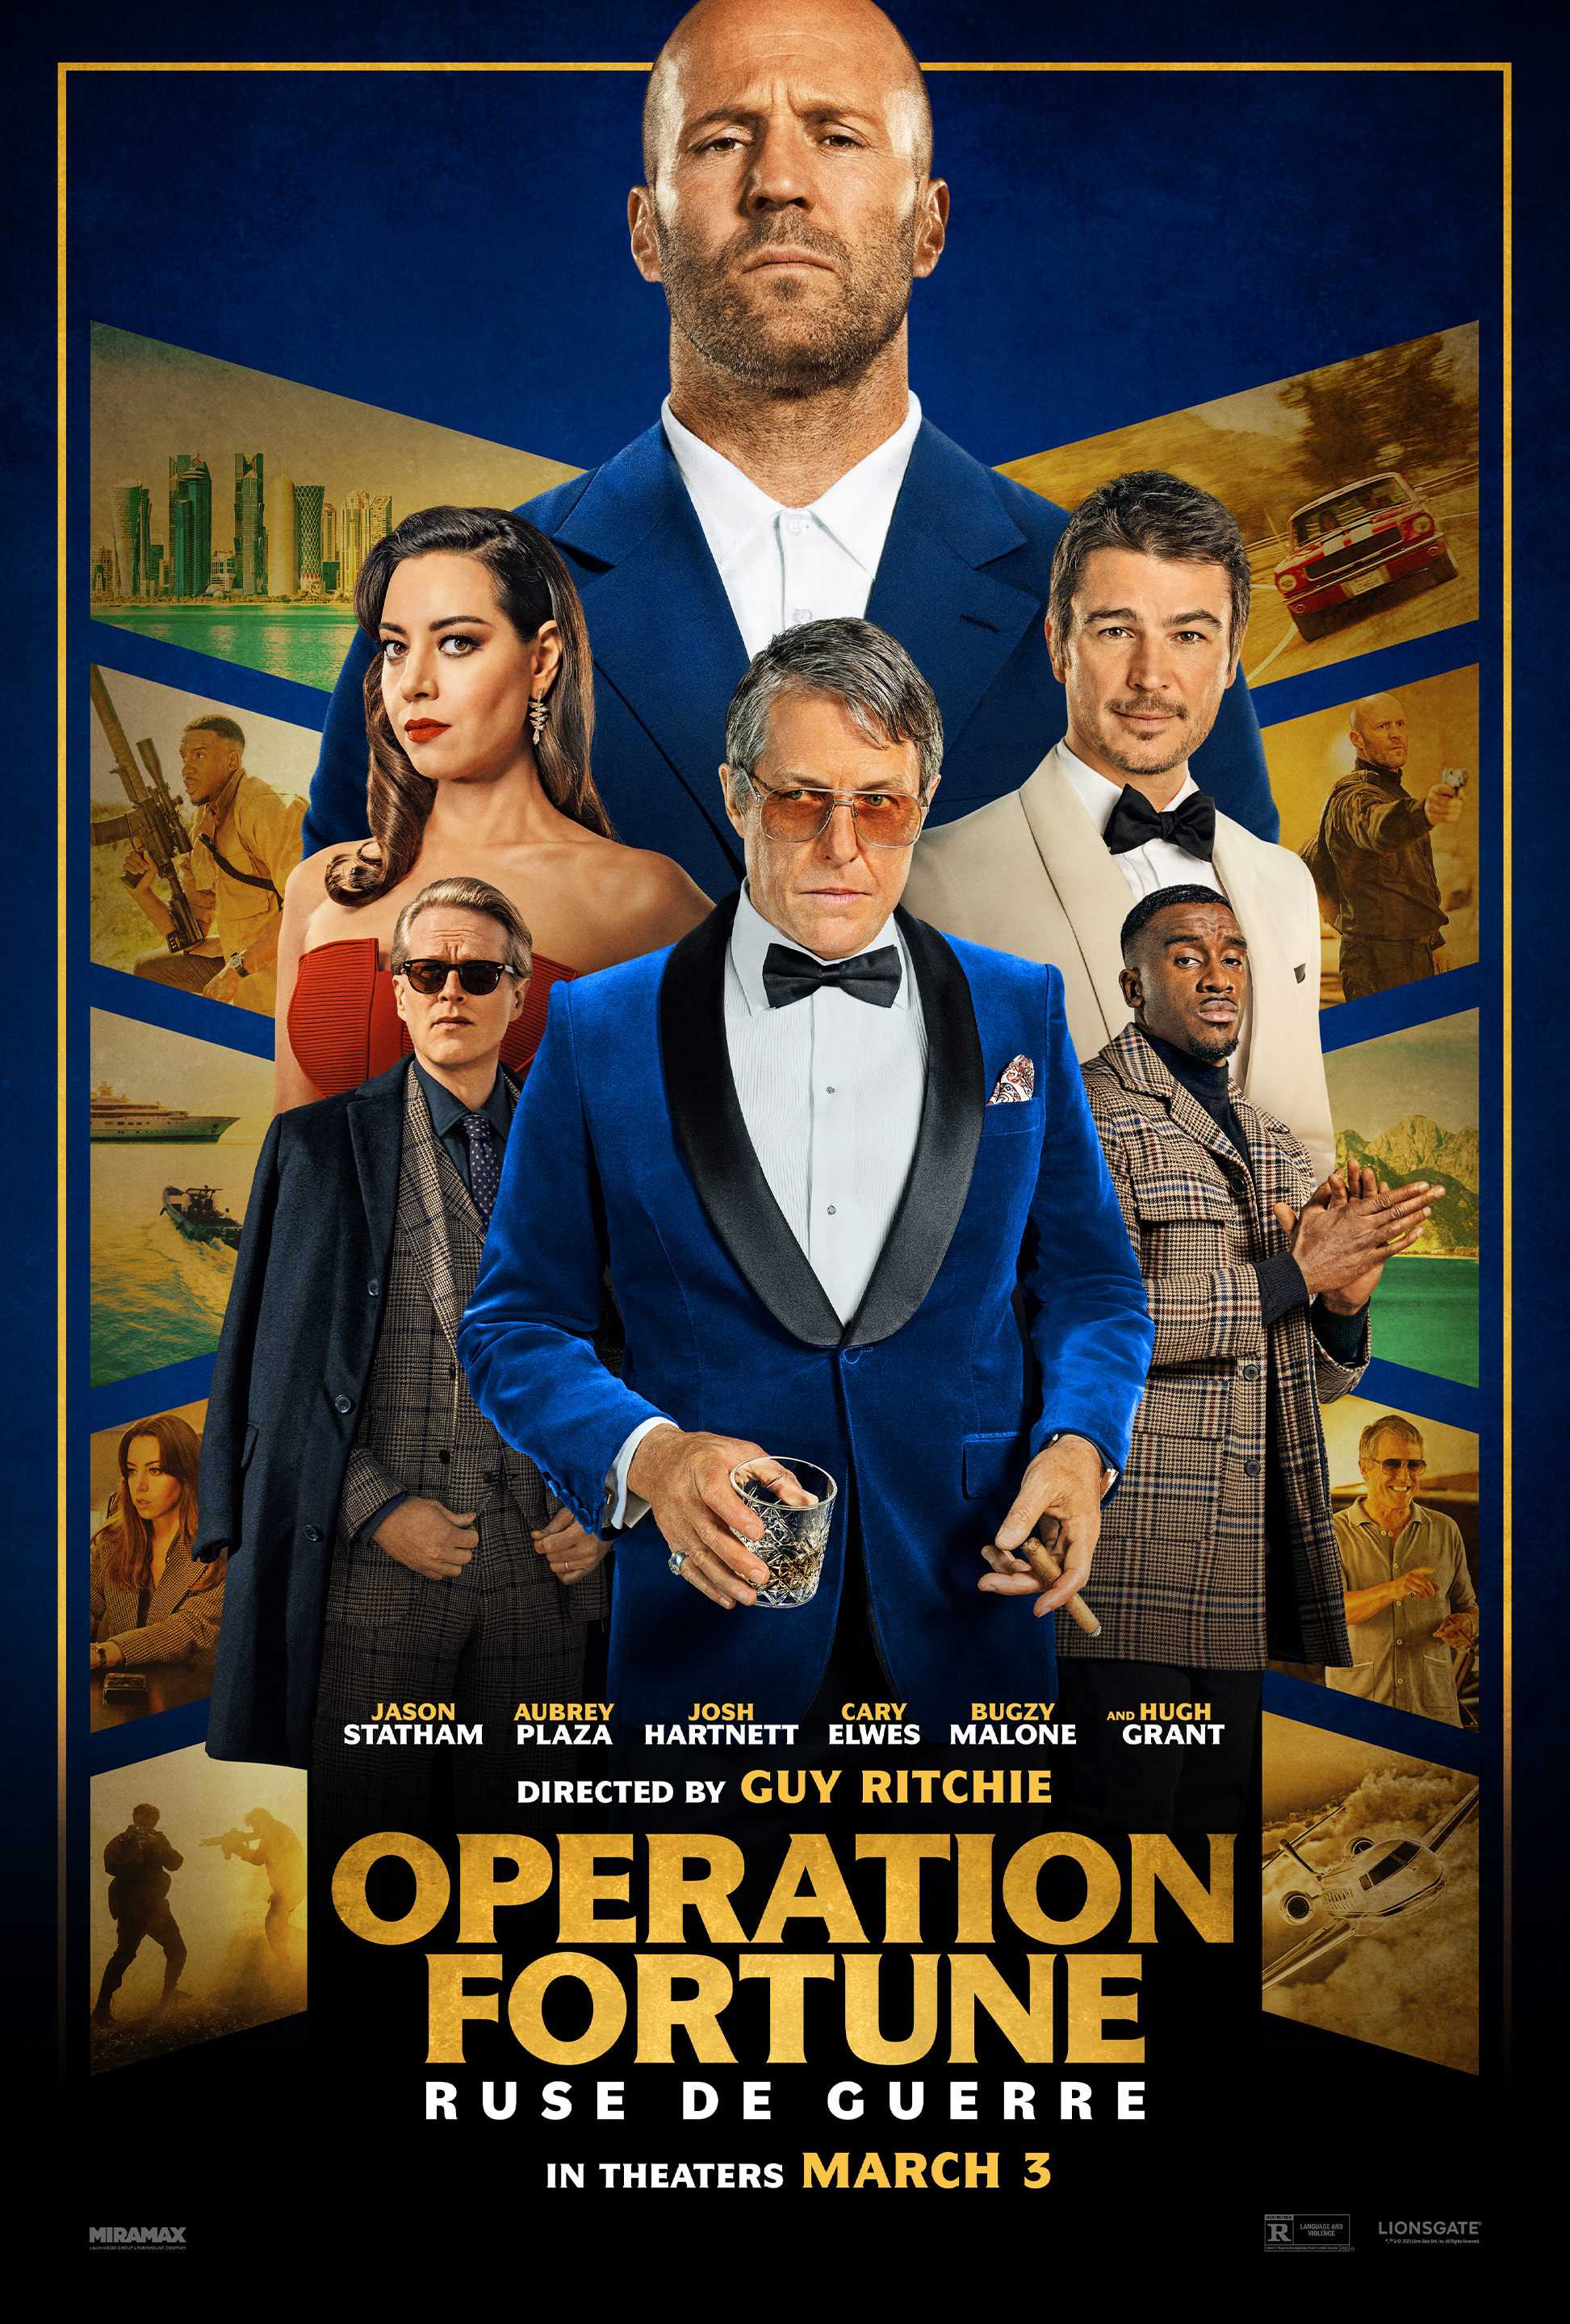 Operation Fortune, Official Website